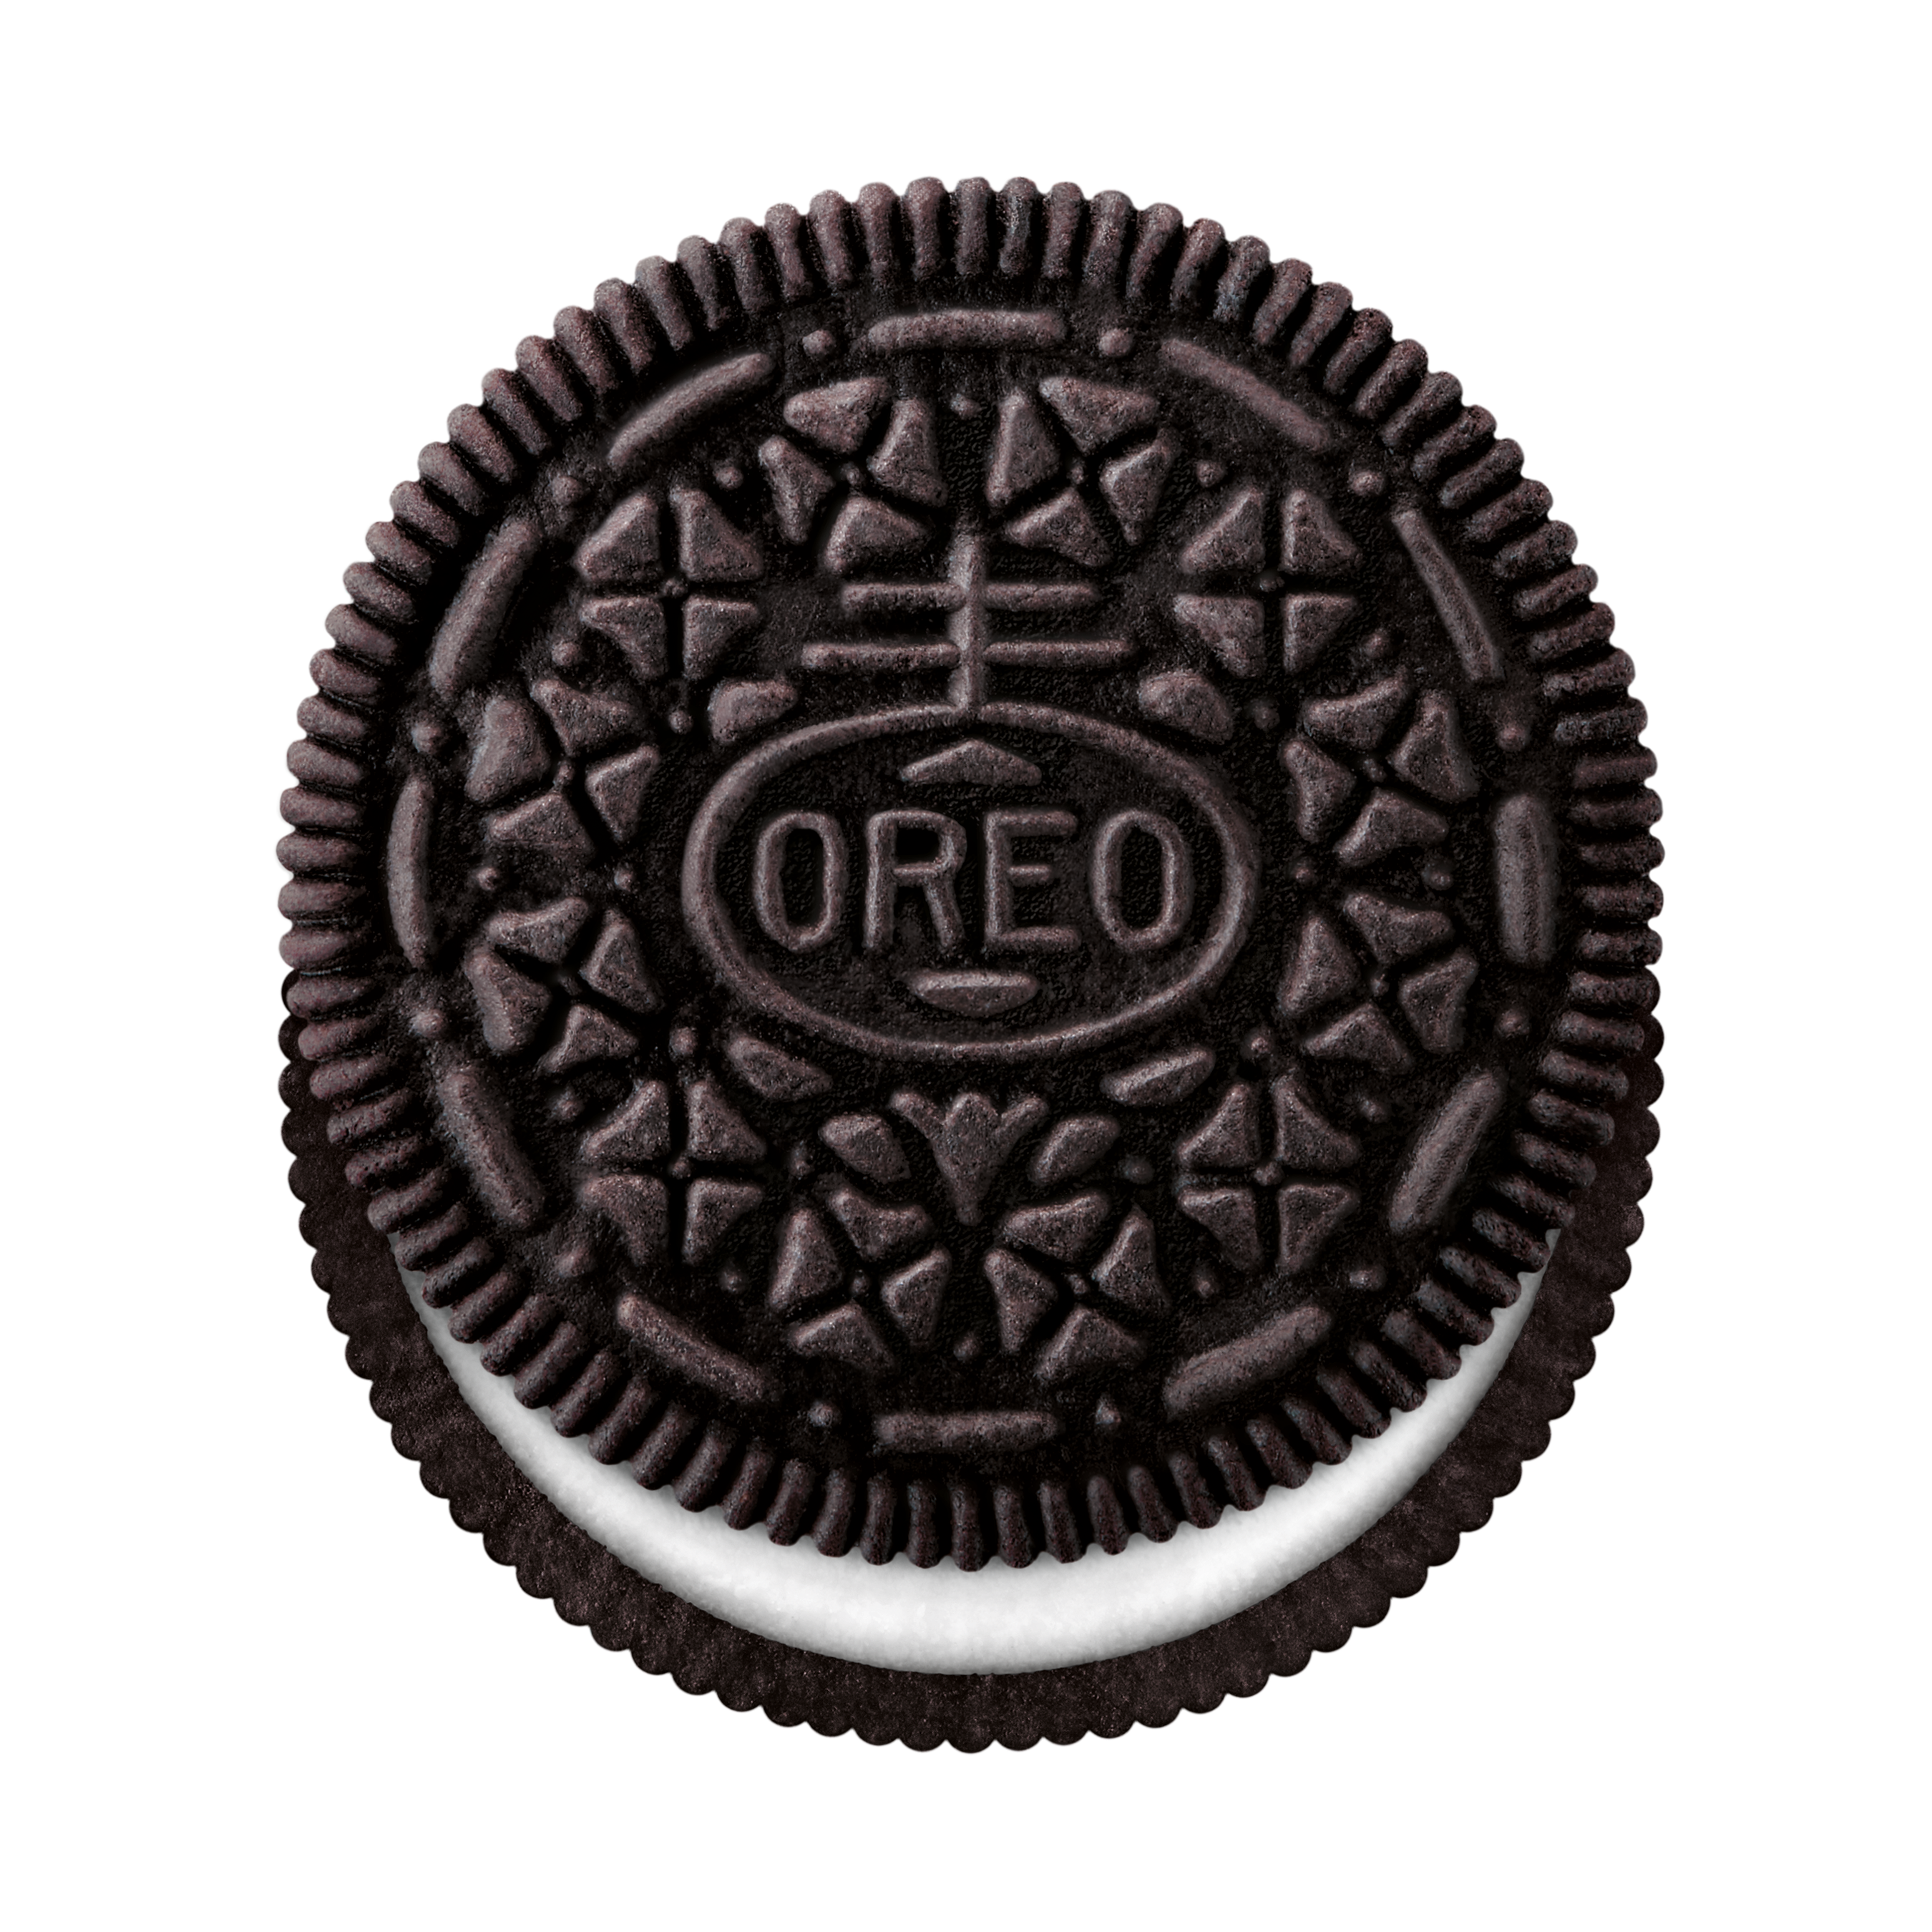 Oreo clipart free download clip art on